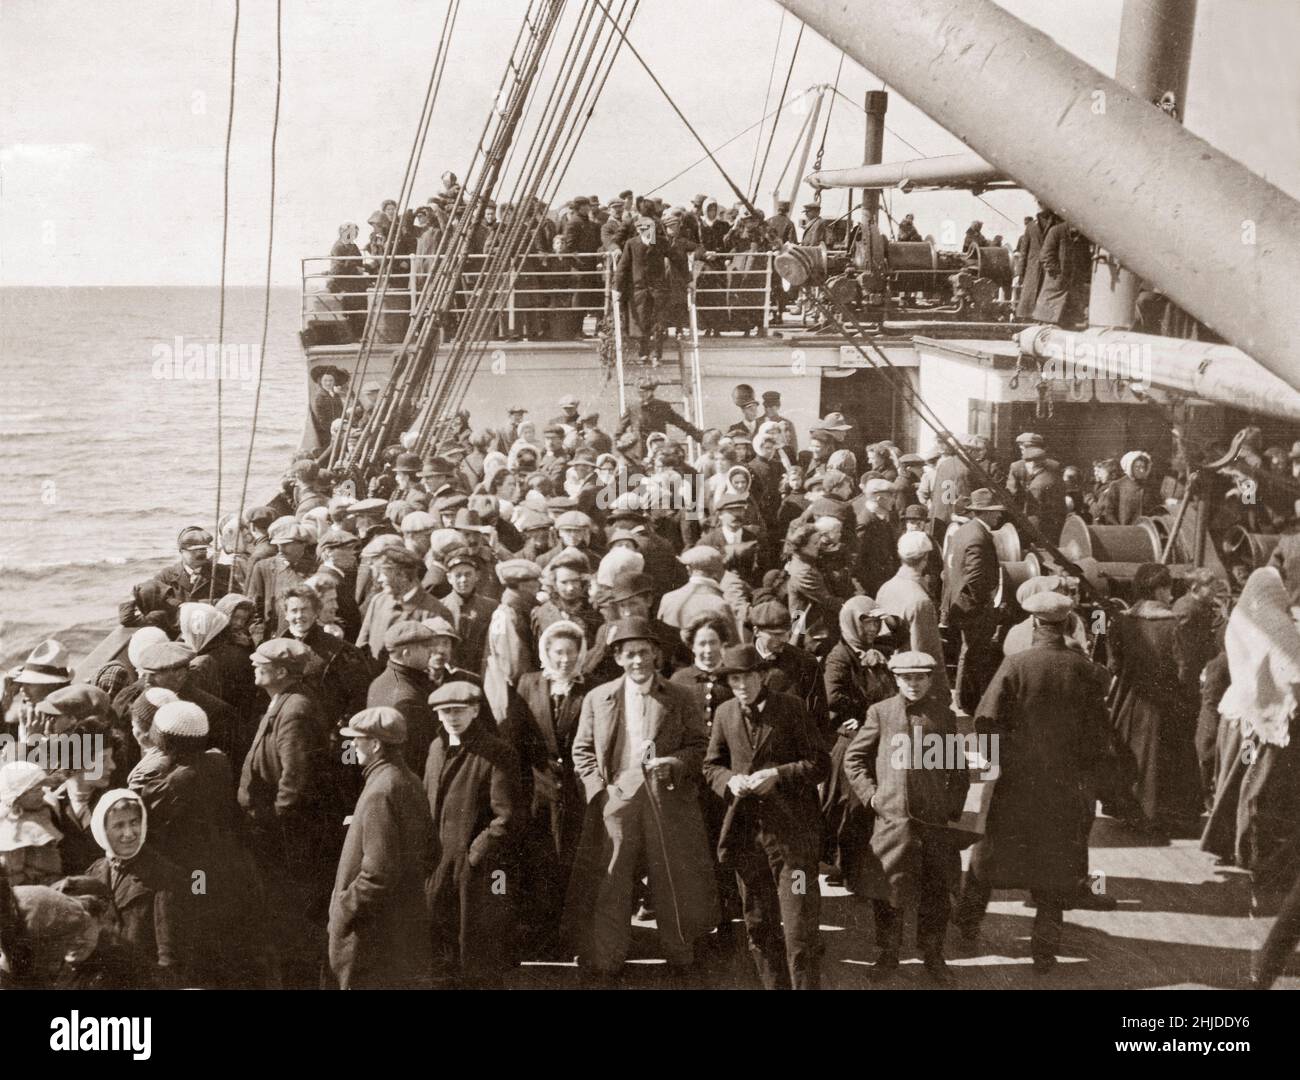 Onboard in 1914. People onboard the canadian steamer RMS Empress of Ireland at the Liverpool harbor headed for Canada. On the Saint Lawrence in Canada river the ship collided with the norwegian coalship SS Storstad and sunk in the early hours of 29 may 1914. 1012 people lost their lifes and the number makes the shipdisaster the greatest ever in Canadas history. Only 465 survivors. 1914 Stock Photo